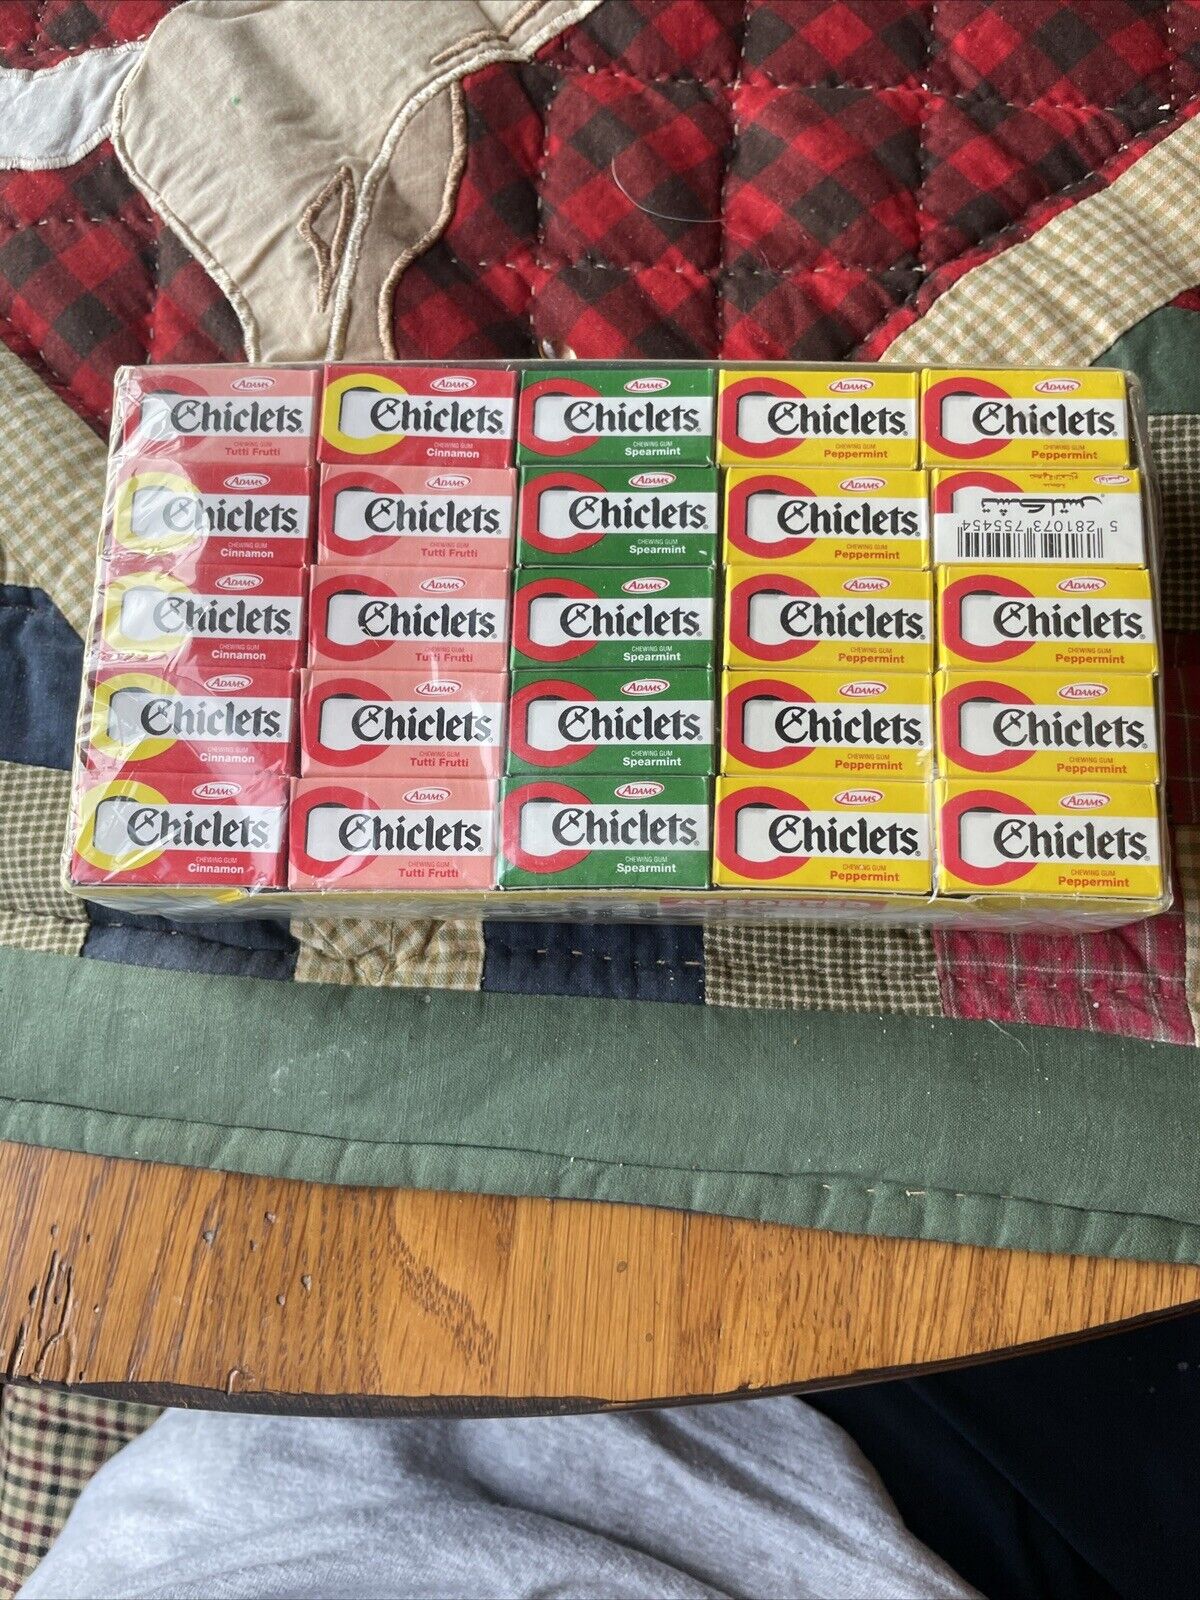 Adams Chiclets Chewing Gum 100 Packs Made In Lebanon Expired 06/2009